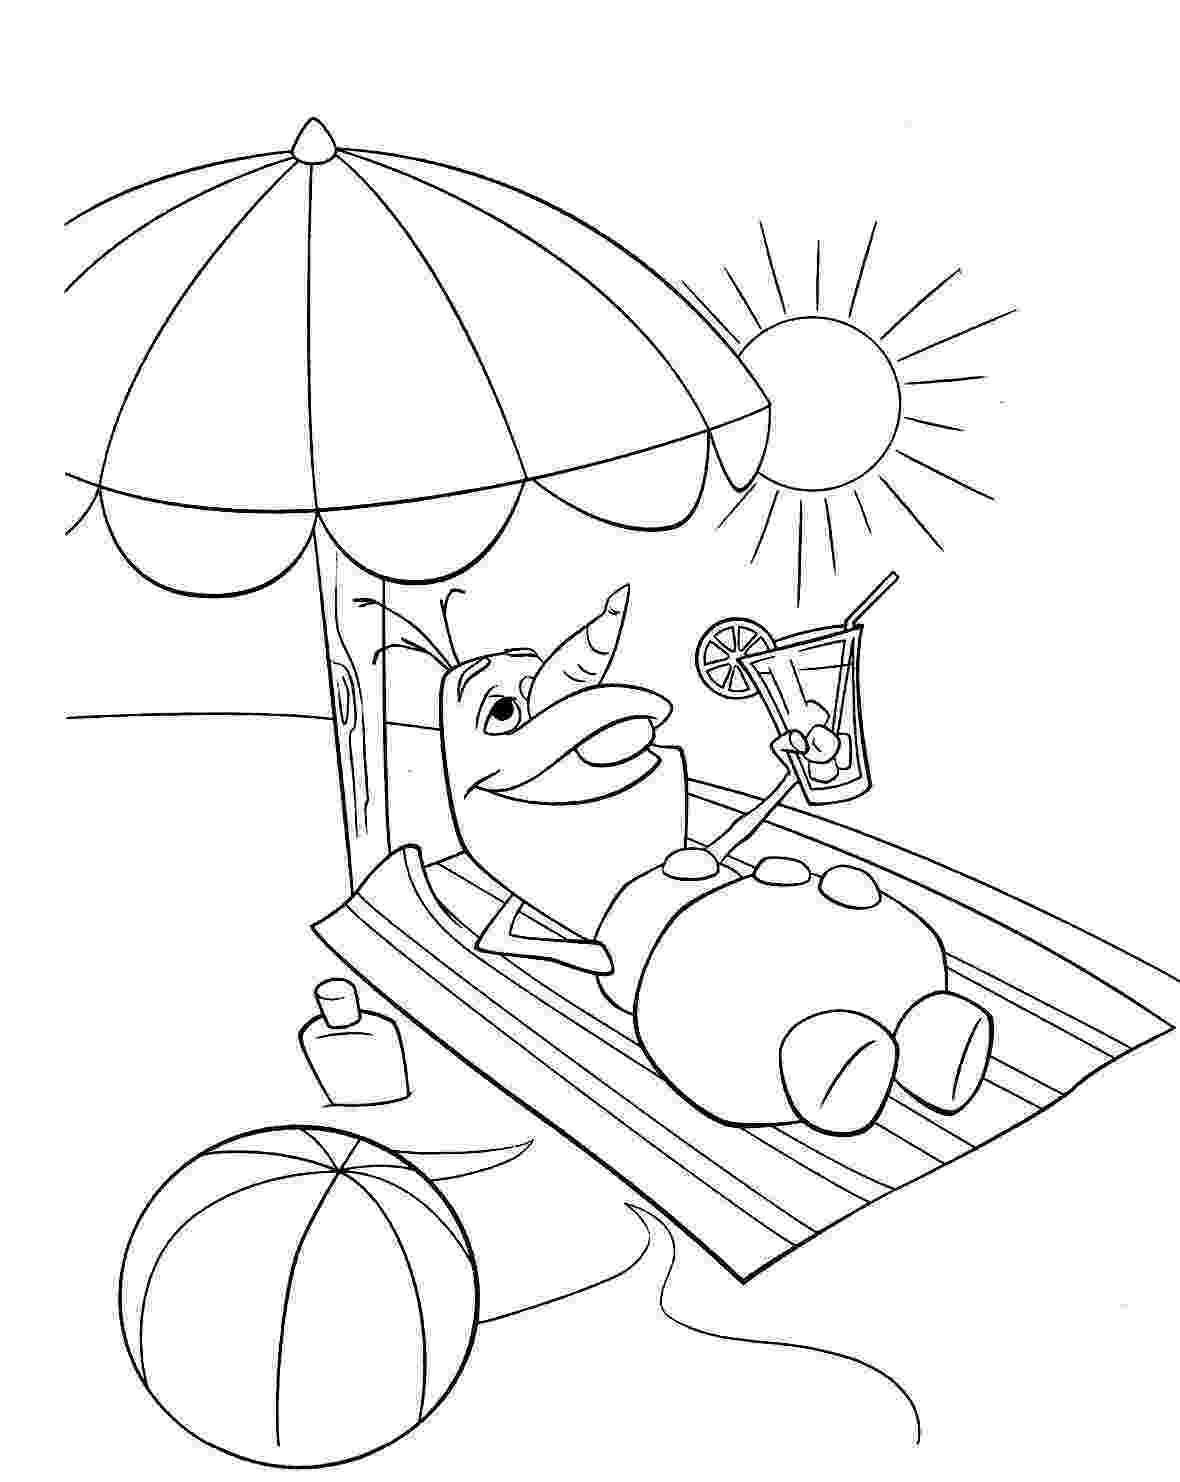 summer coloring pictures summer coloring pages pictures coloring summer 